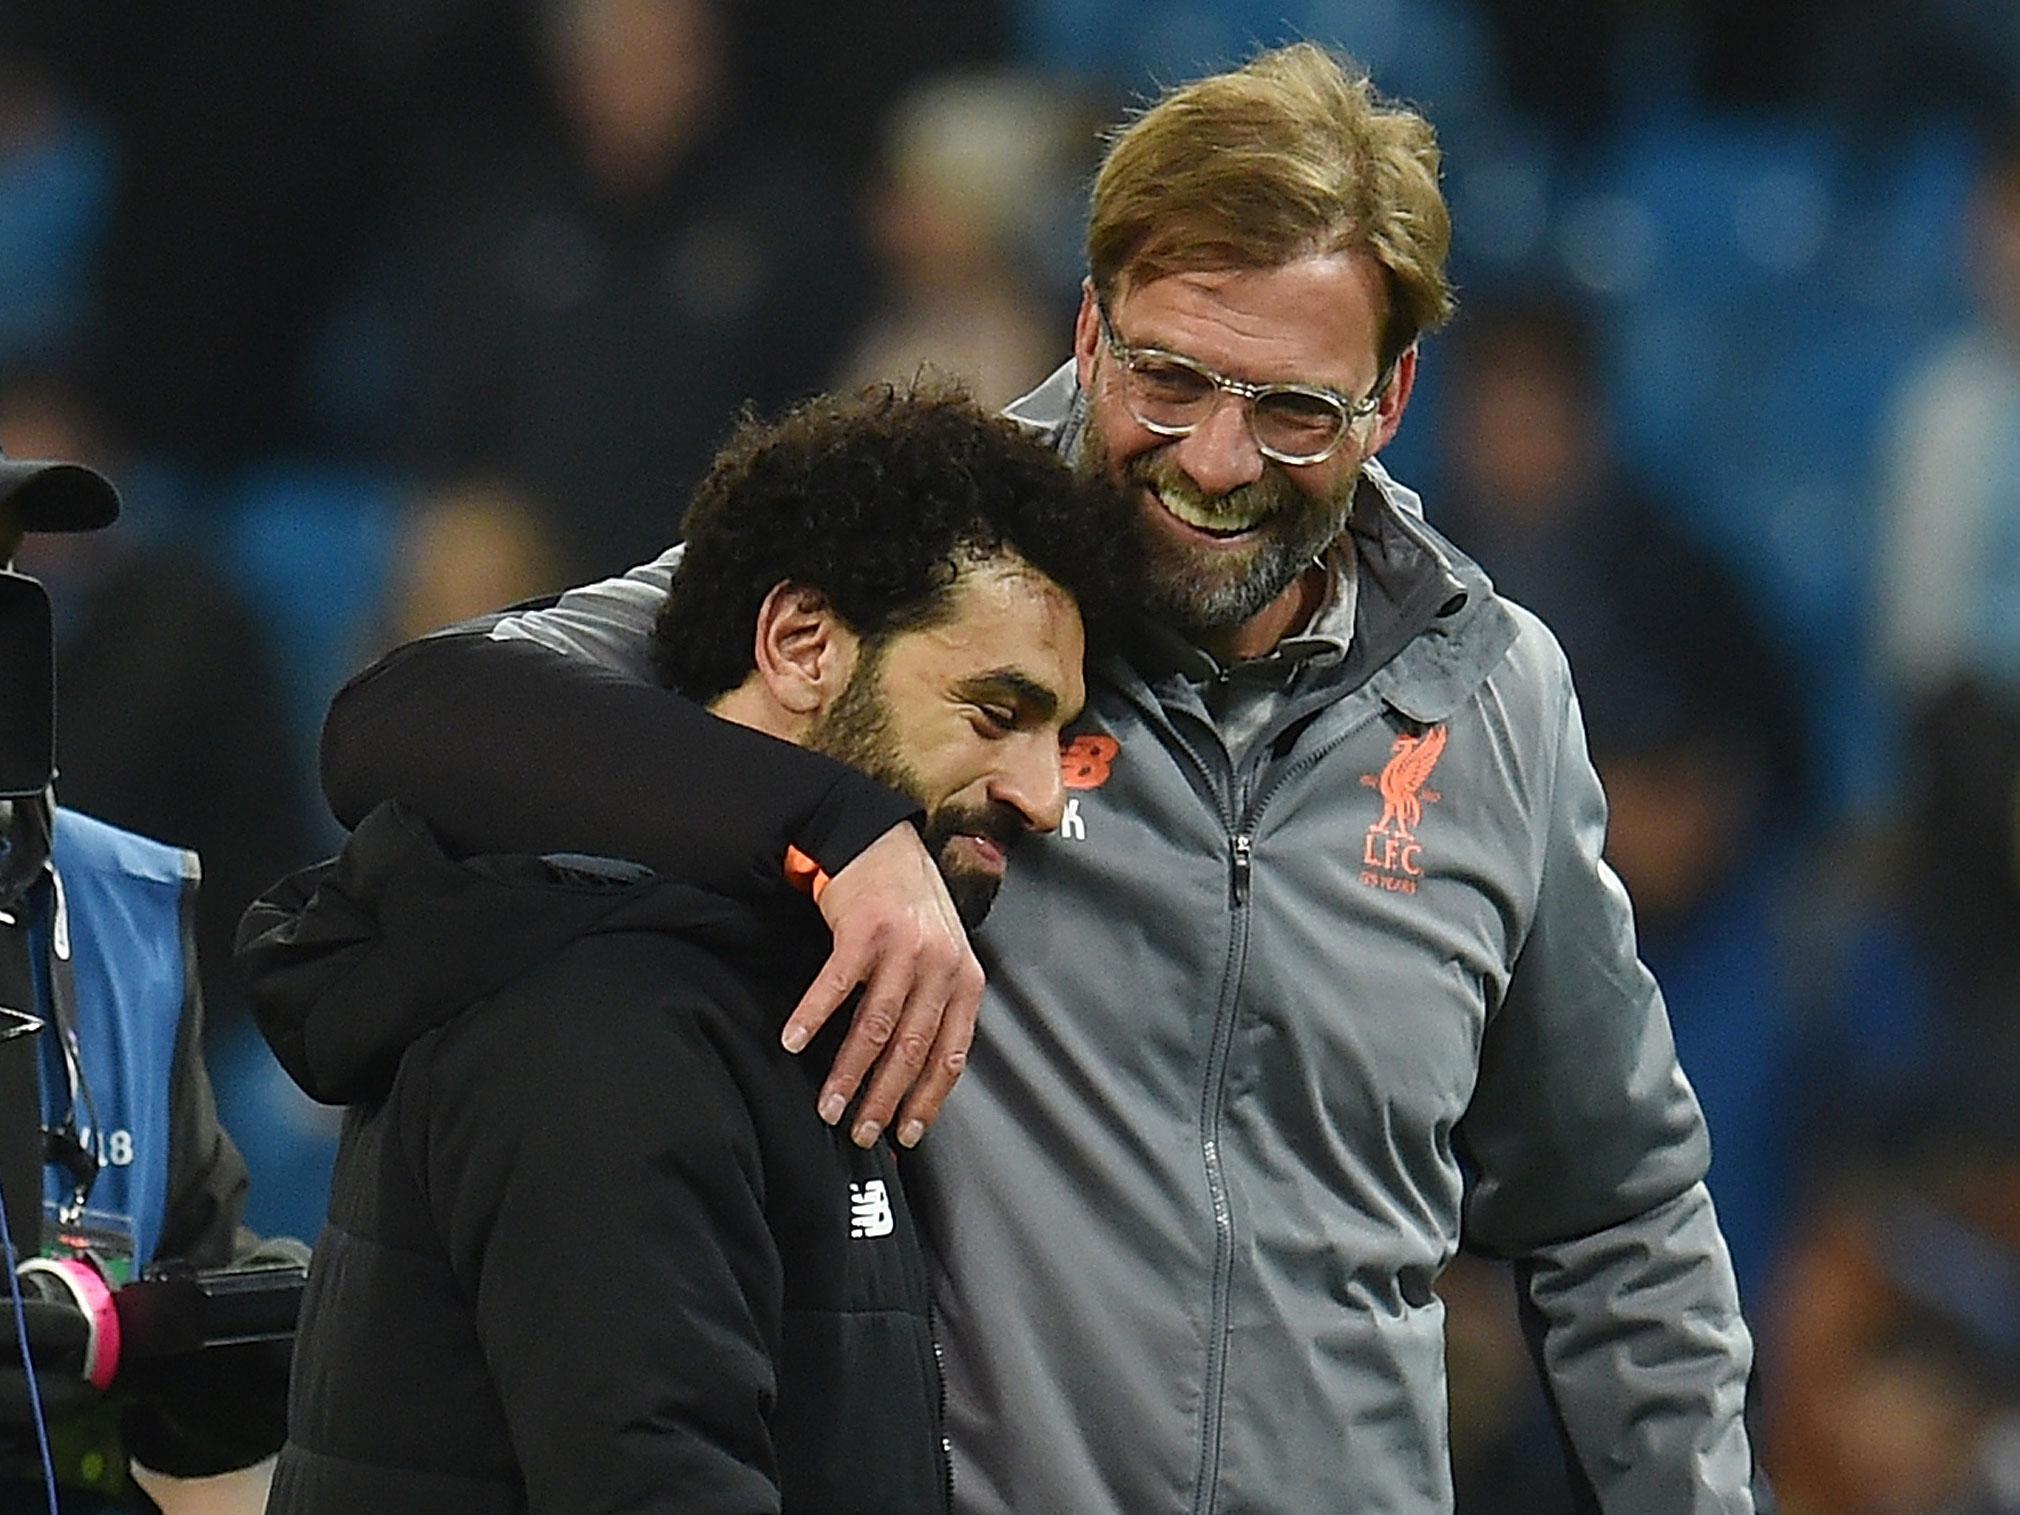 Mohamed Salah has caught the eye after a sparkling debut season with Liverpool